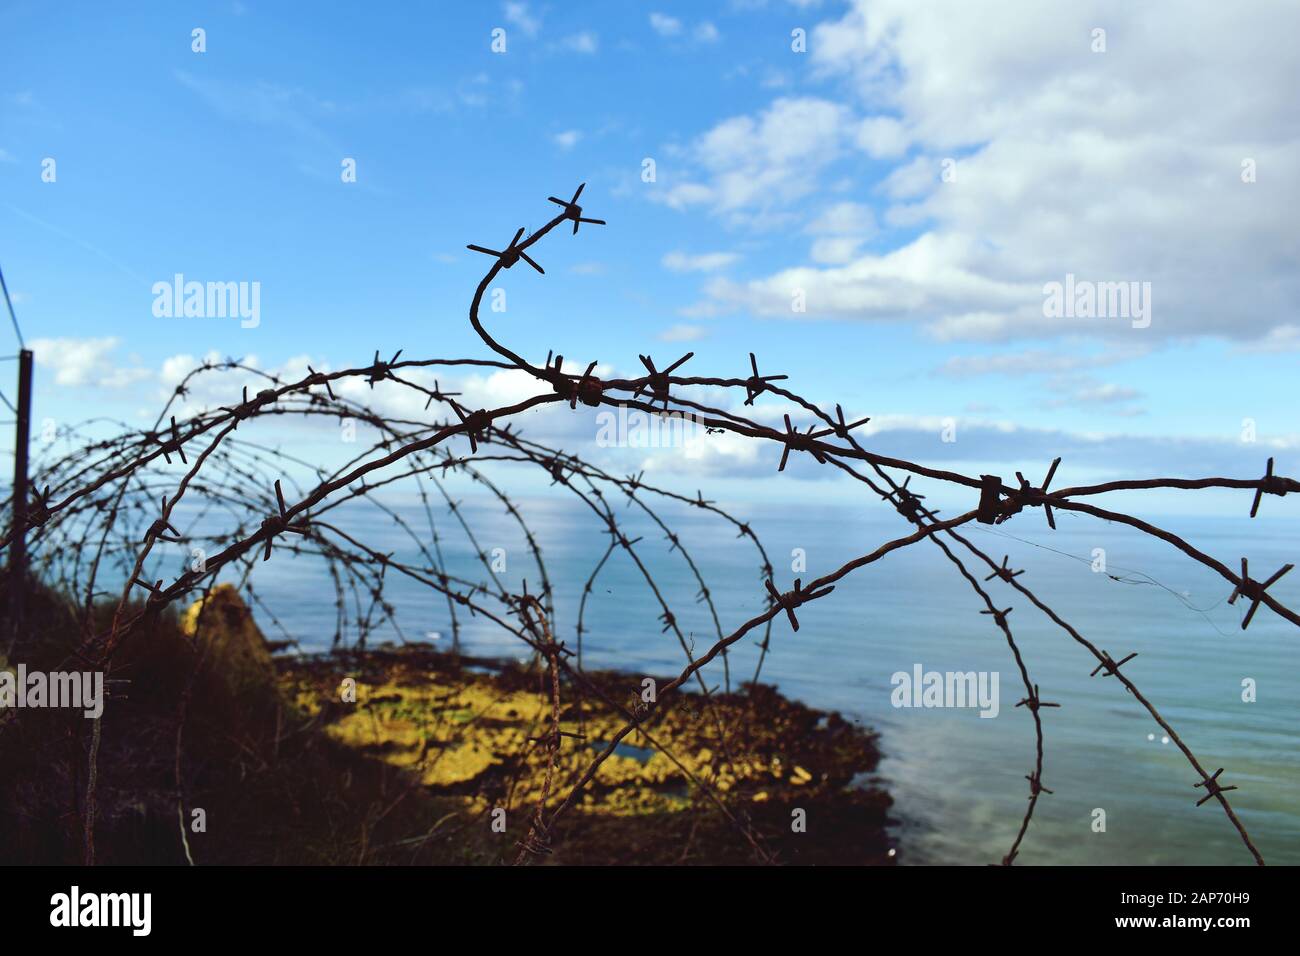 Barbed wire at Point du hoc, Normandy, France. 02. September 2019 Stock Photo